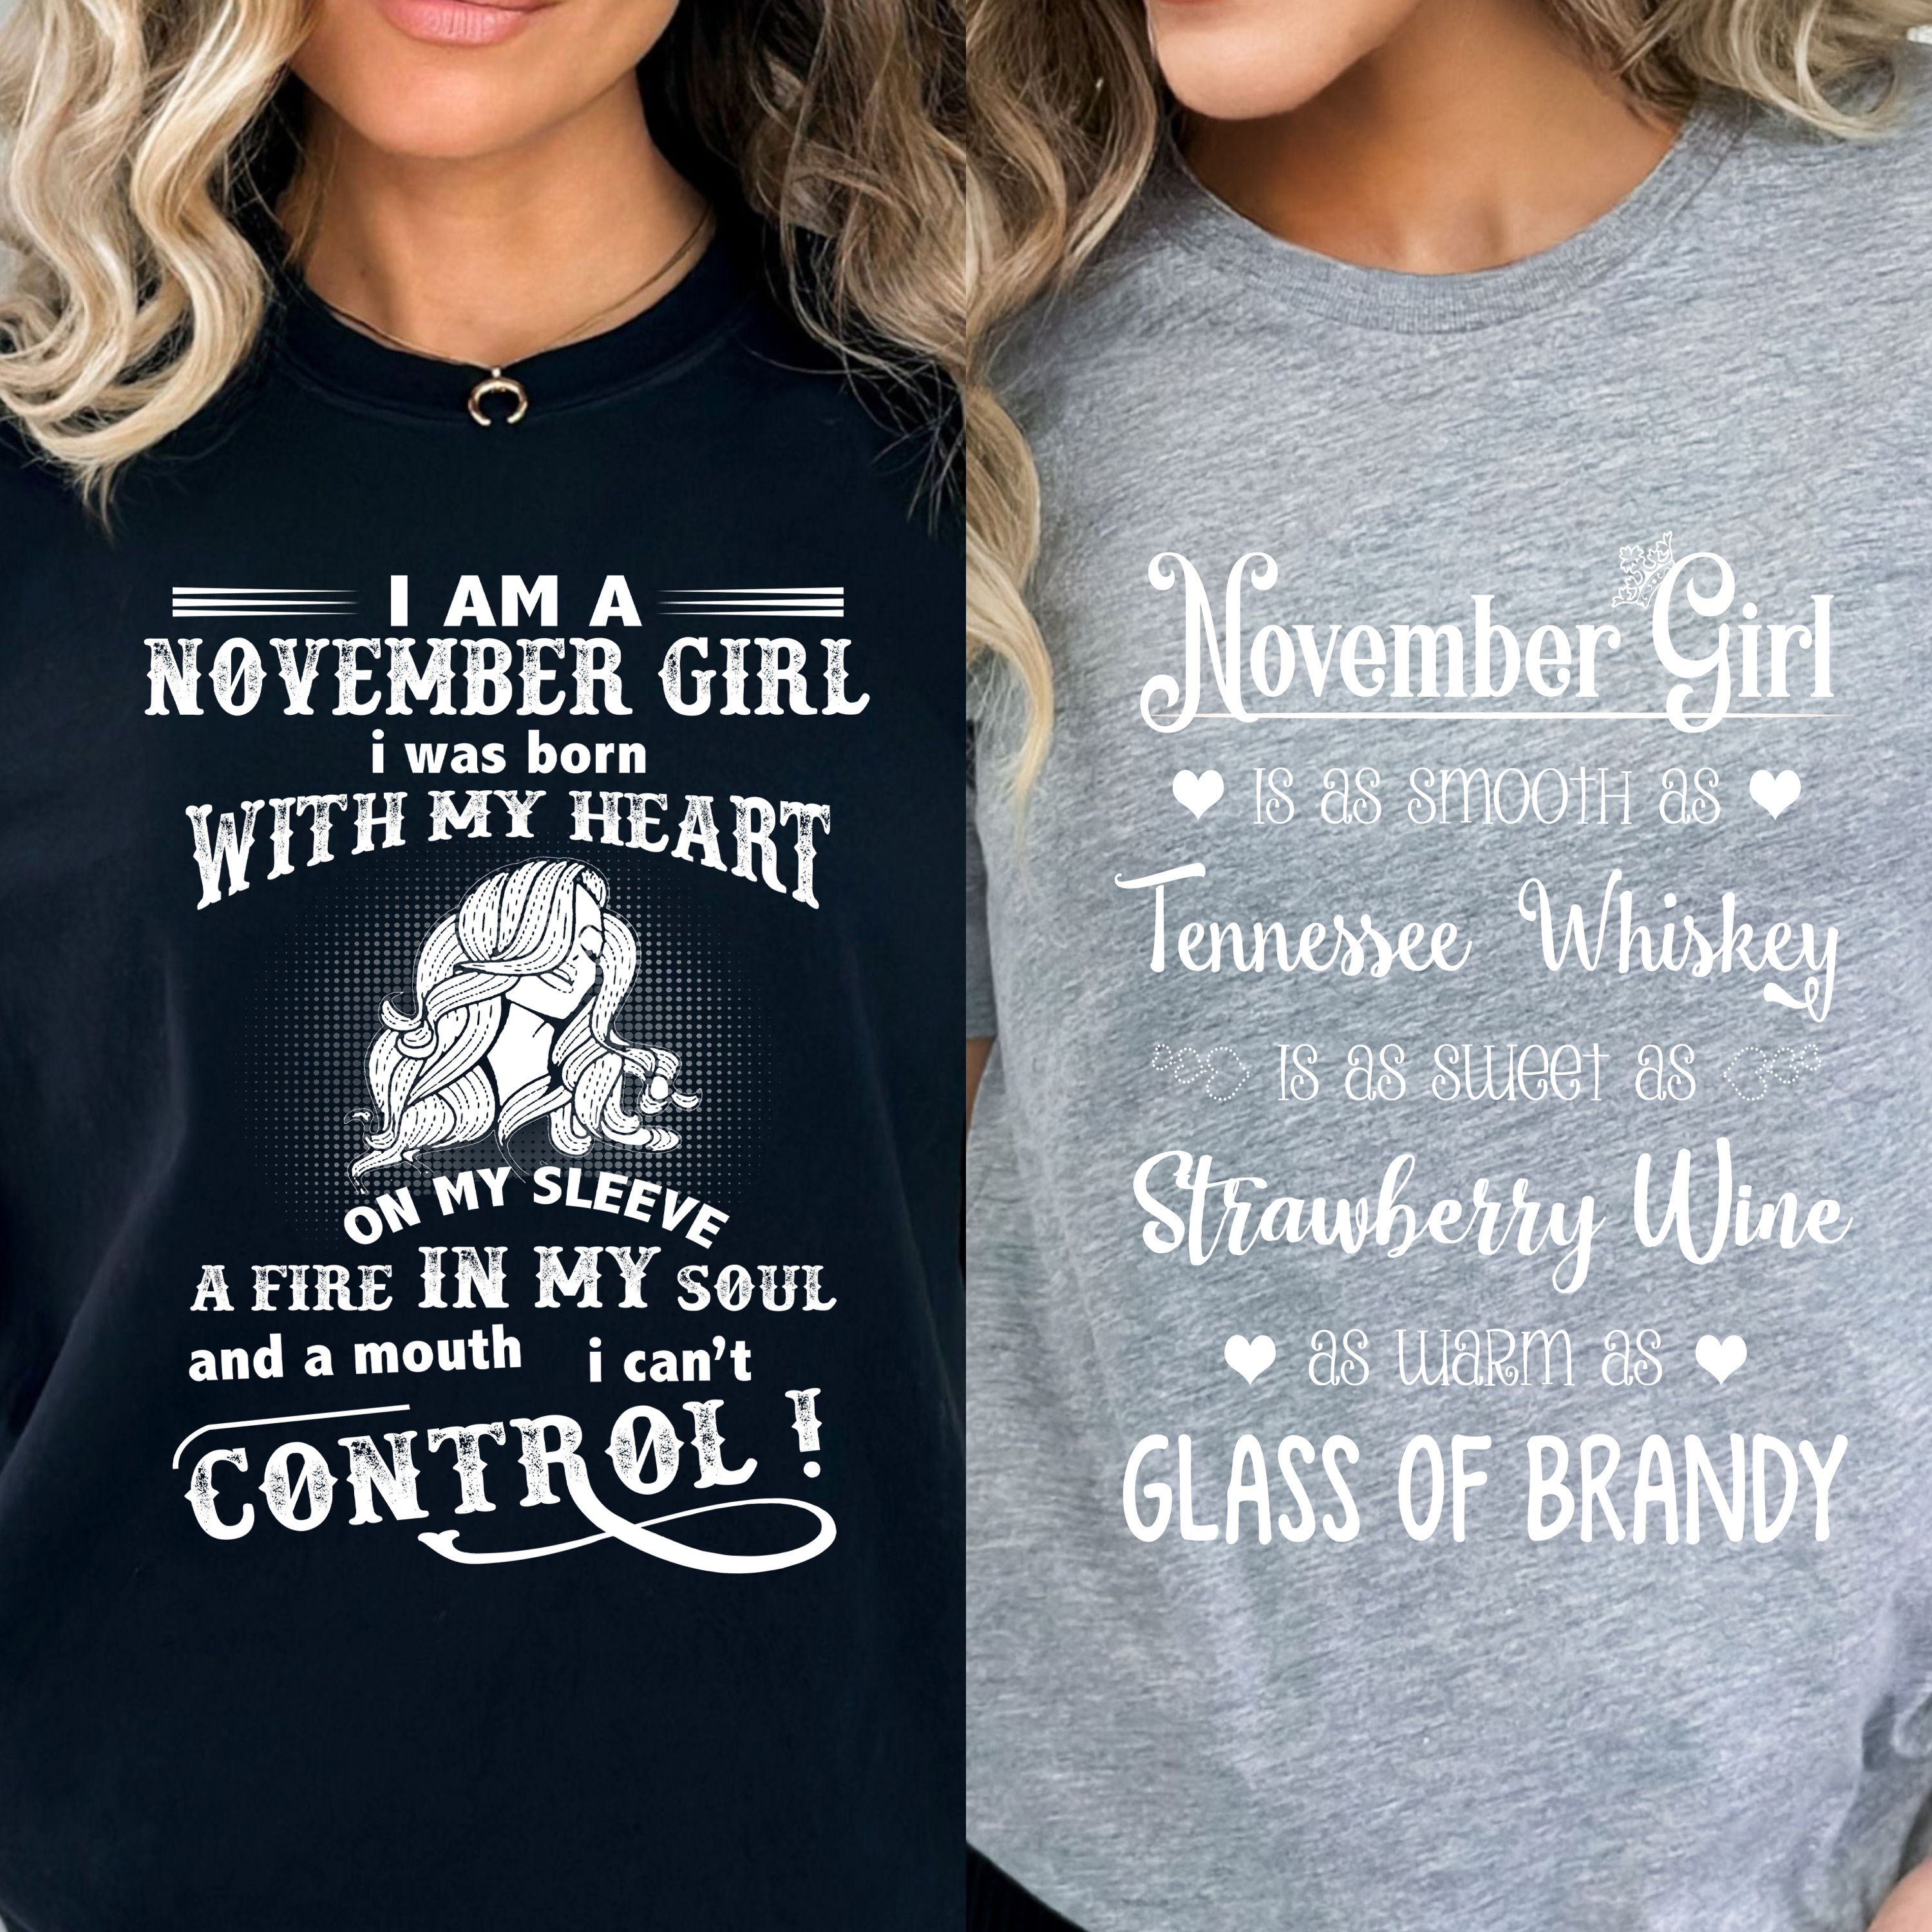 "November Whiskey + Control -Pack of 2".